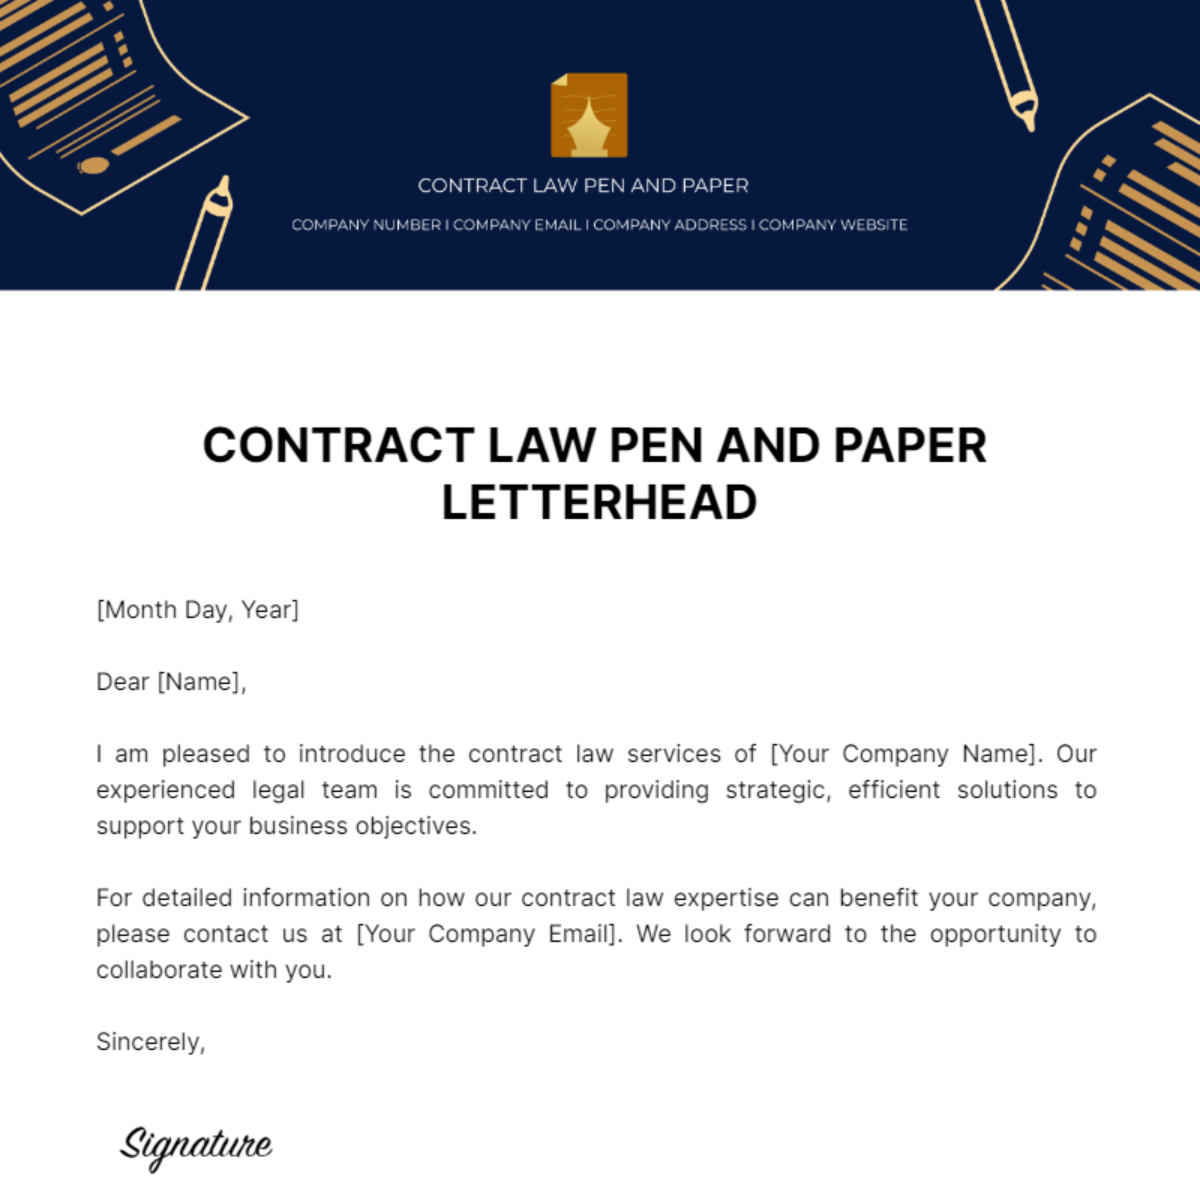 Free Contract Law Pen and Paper Letterhead Template